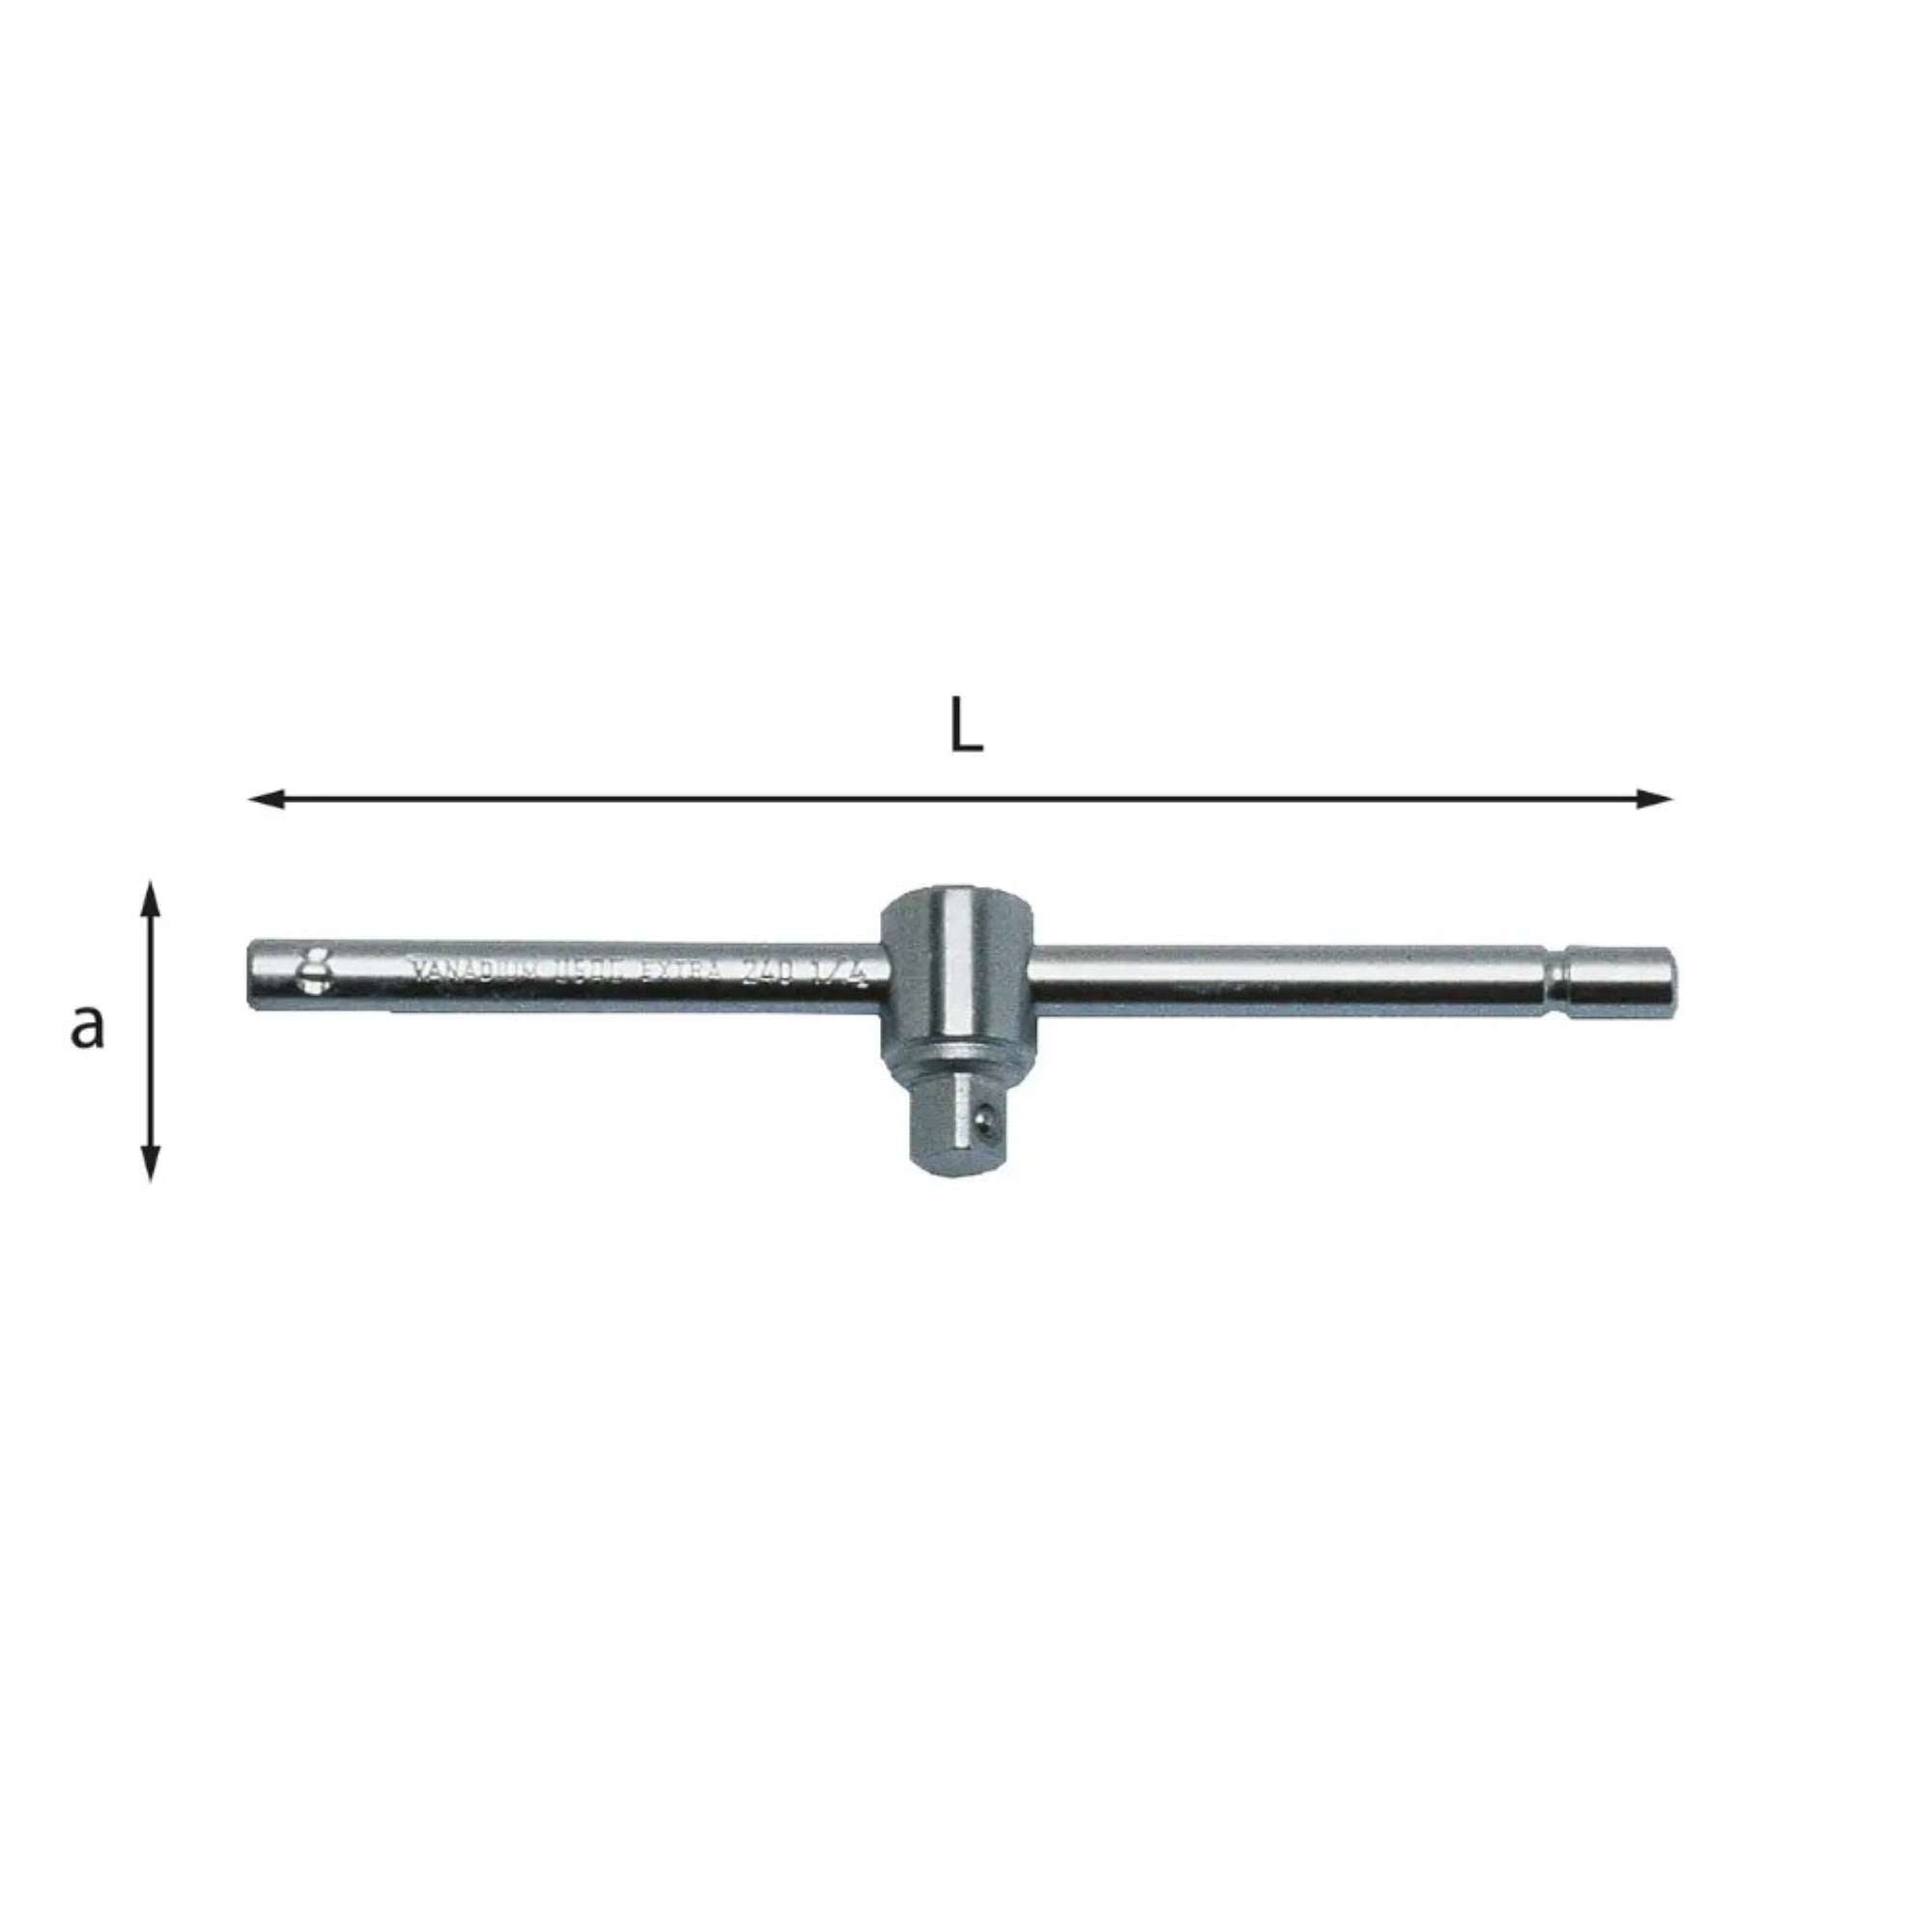 T-lever with sliding square fitting in chrome vanadium steel 240 1/4 N Usag